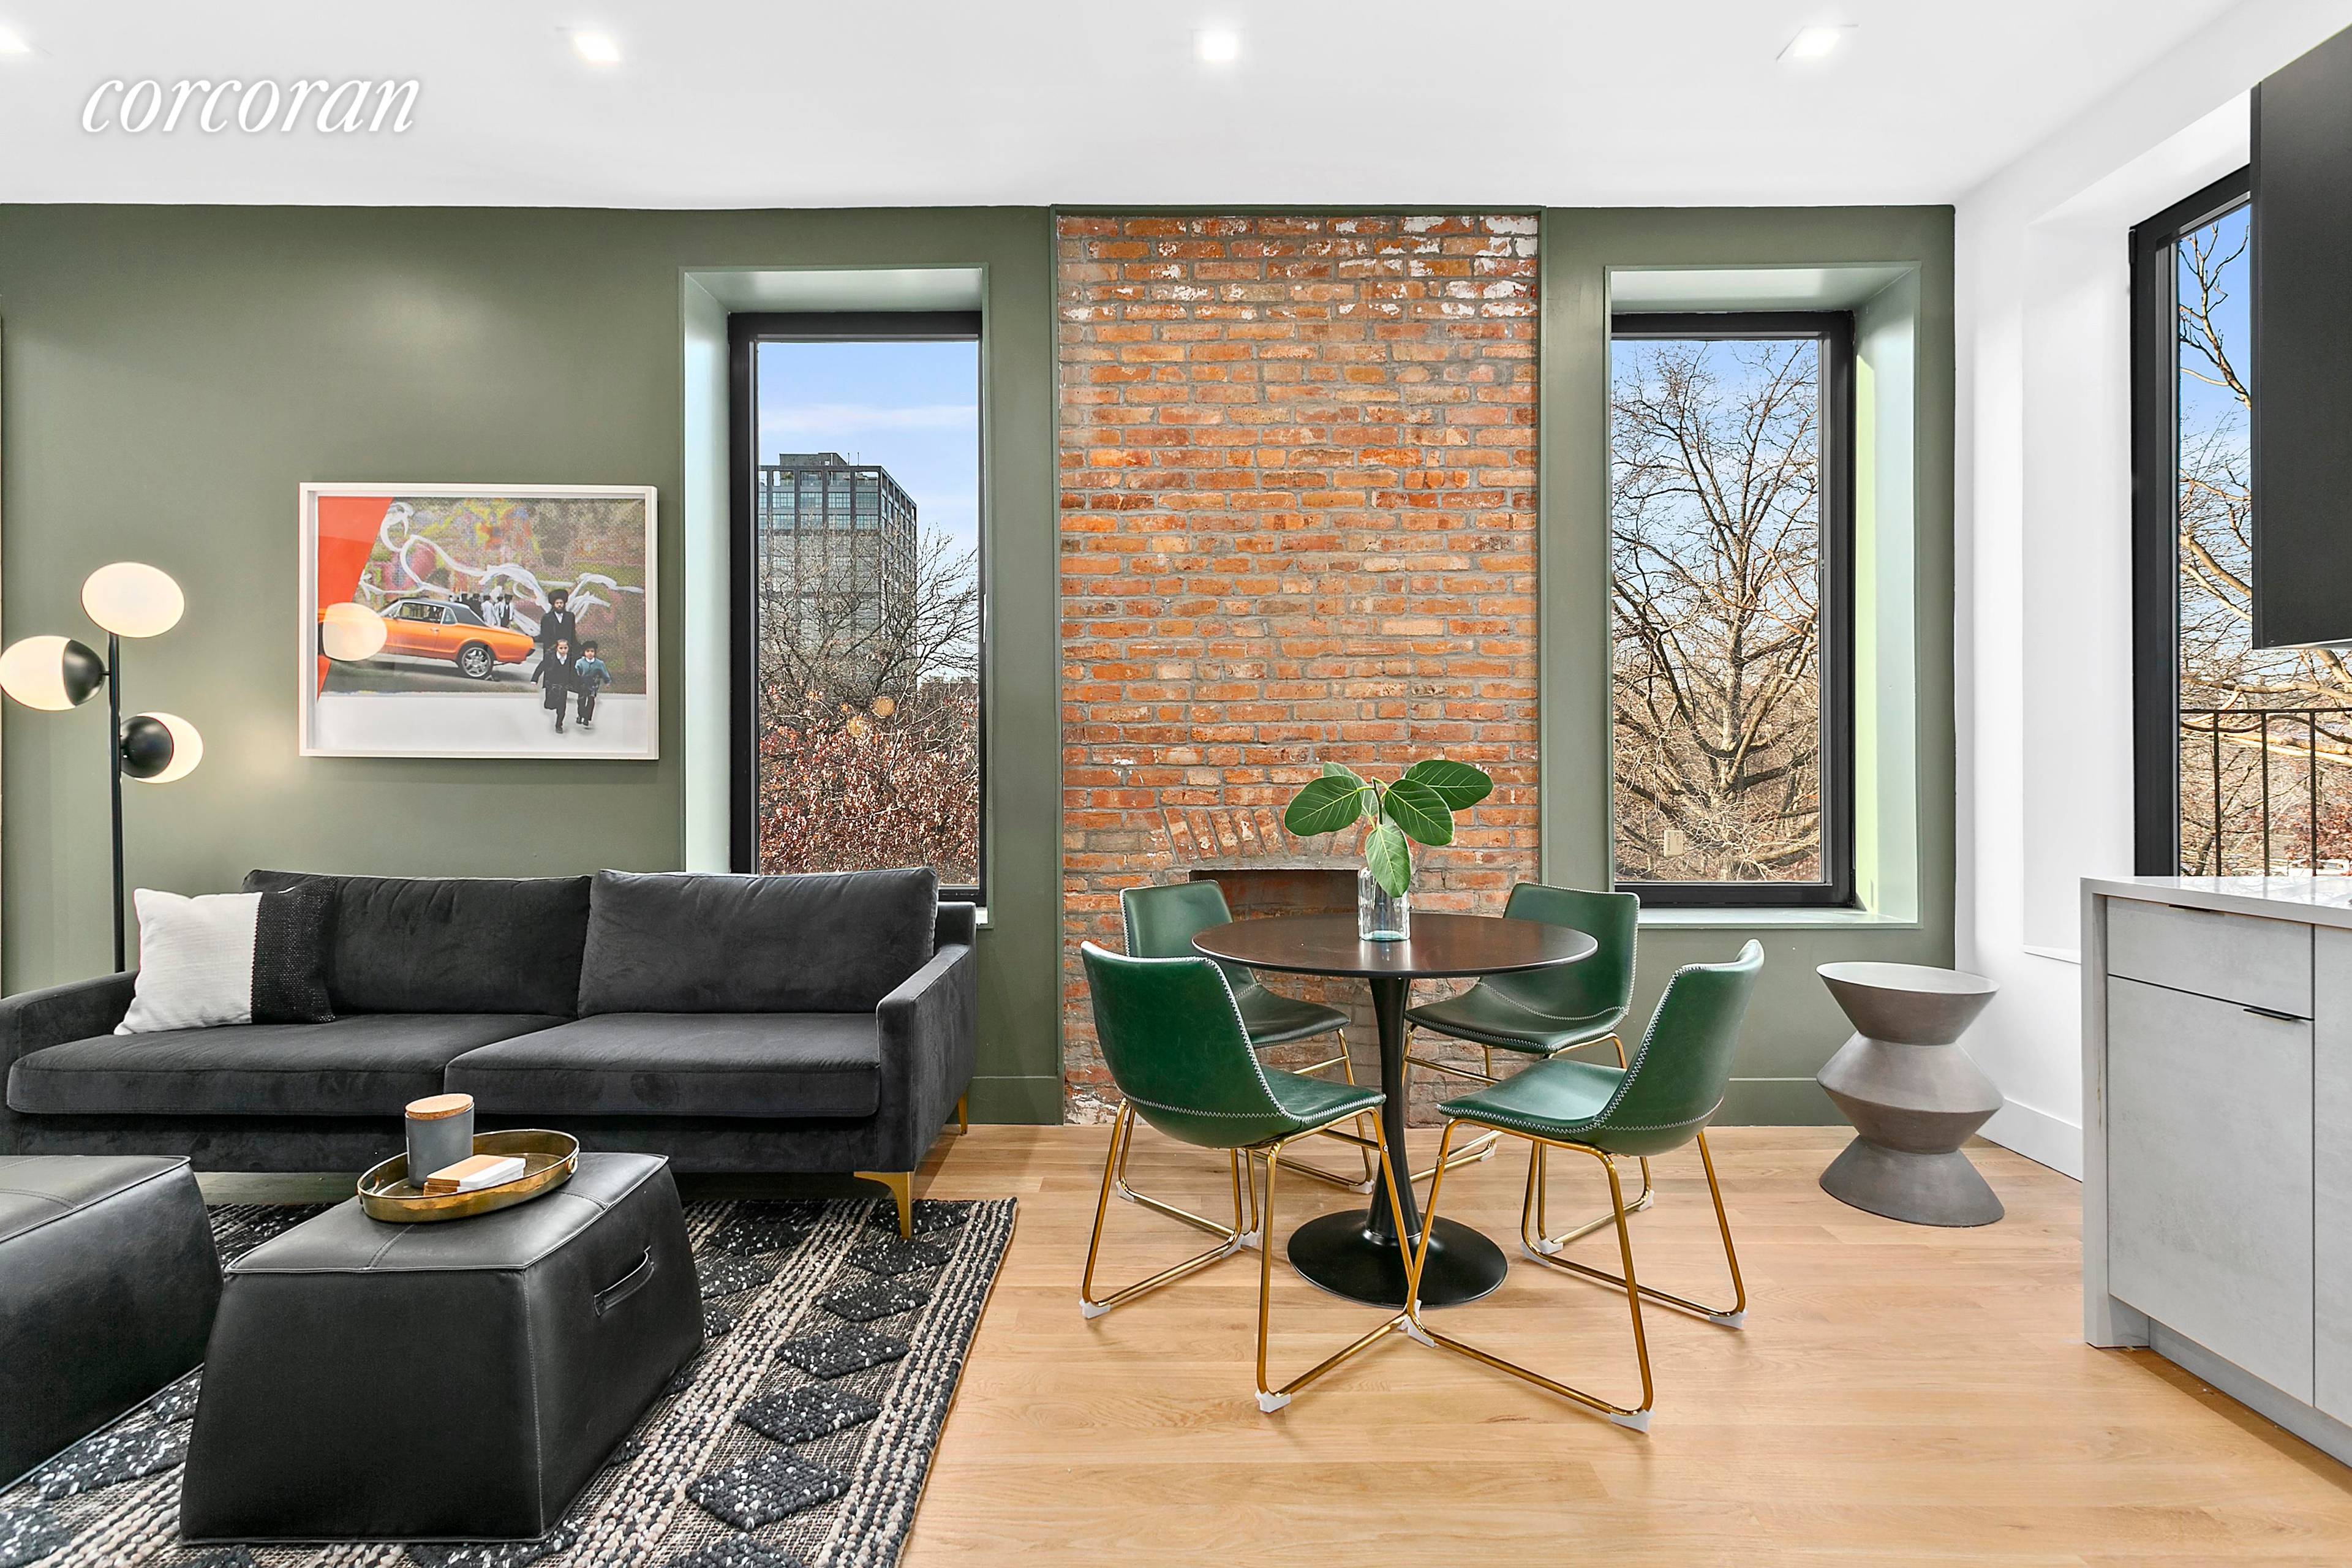 SHOWINGS amp ; OPEN HOUSES BY APPOINTMENT ONLY Old Meets New, Style Meets Function, Williamsburg ; Meet 317 South 5th Street.